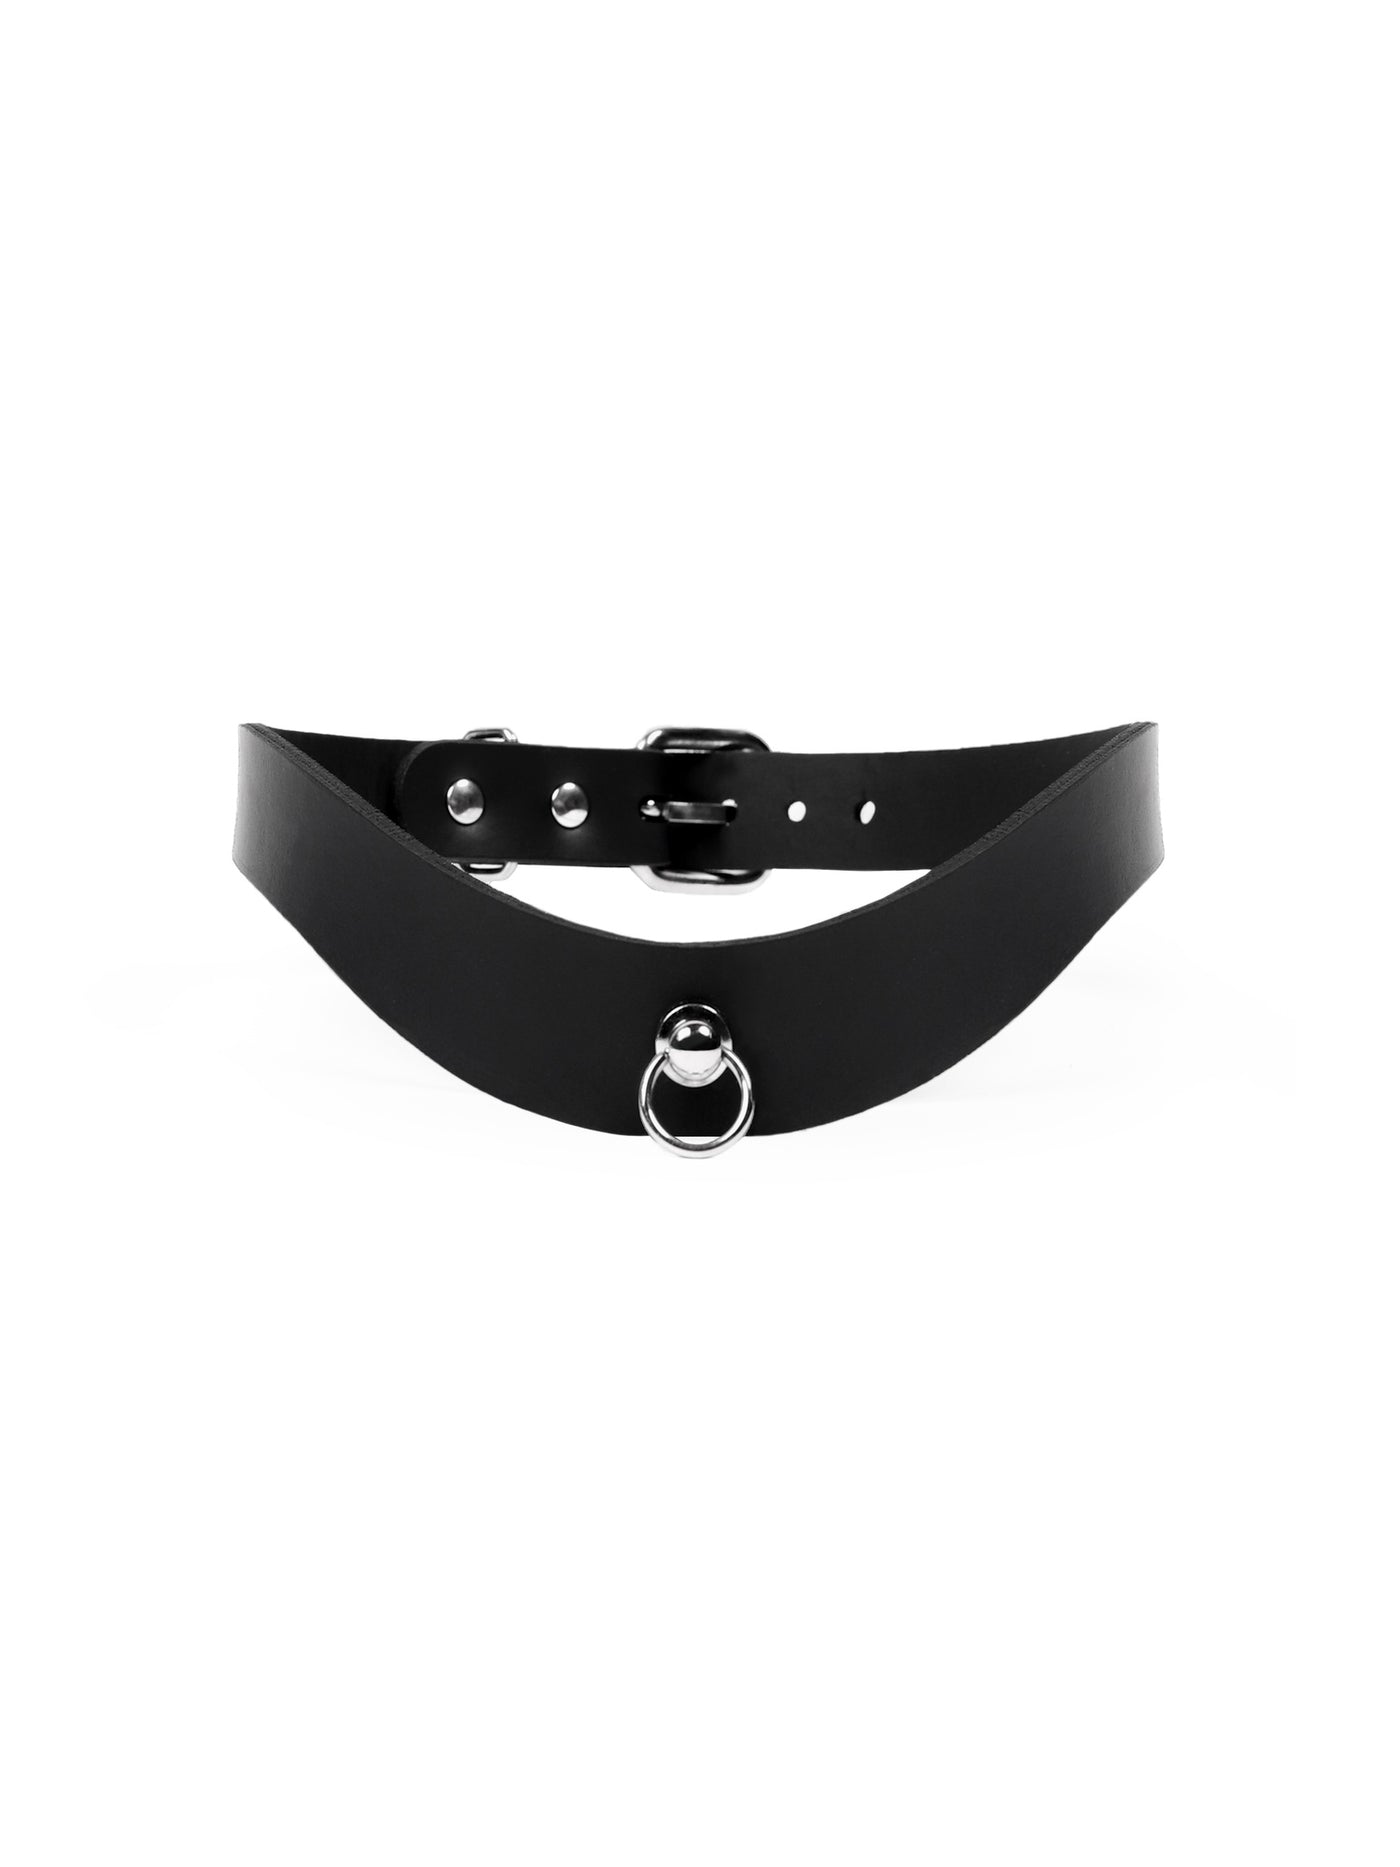 Front view of the Viola vegan choker by Baby turns Blue Paris